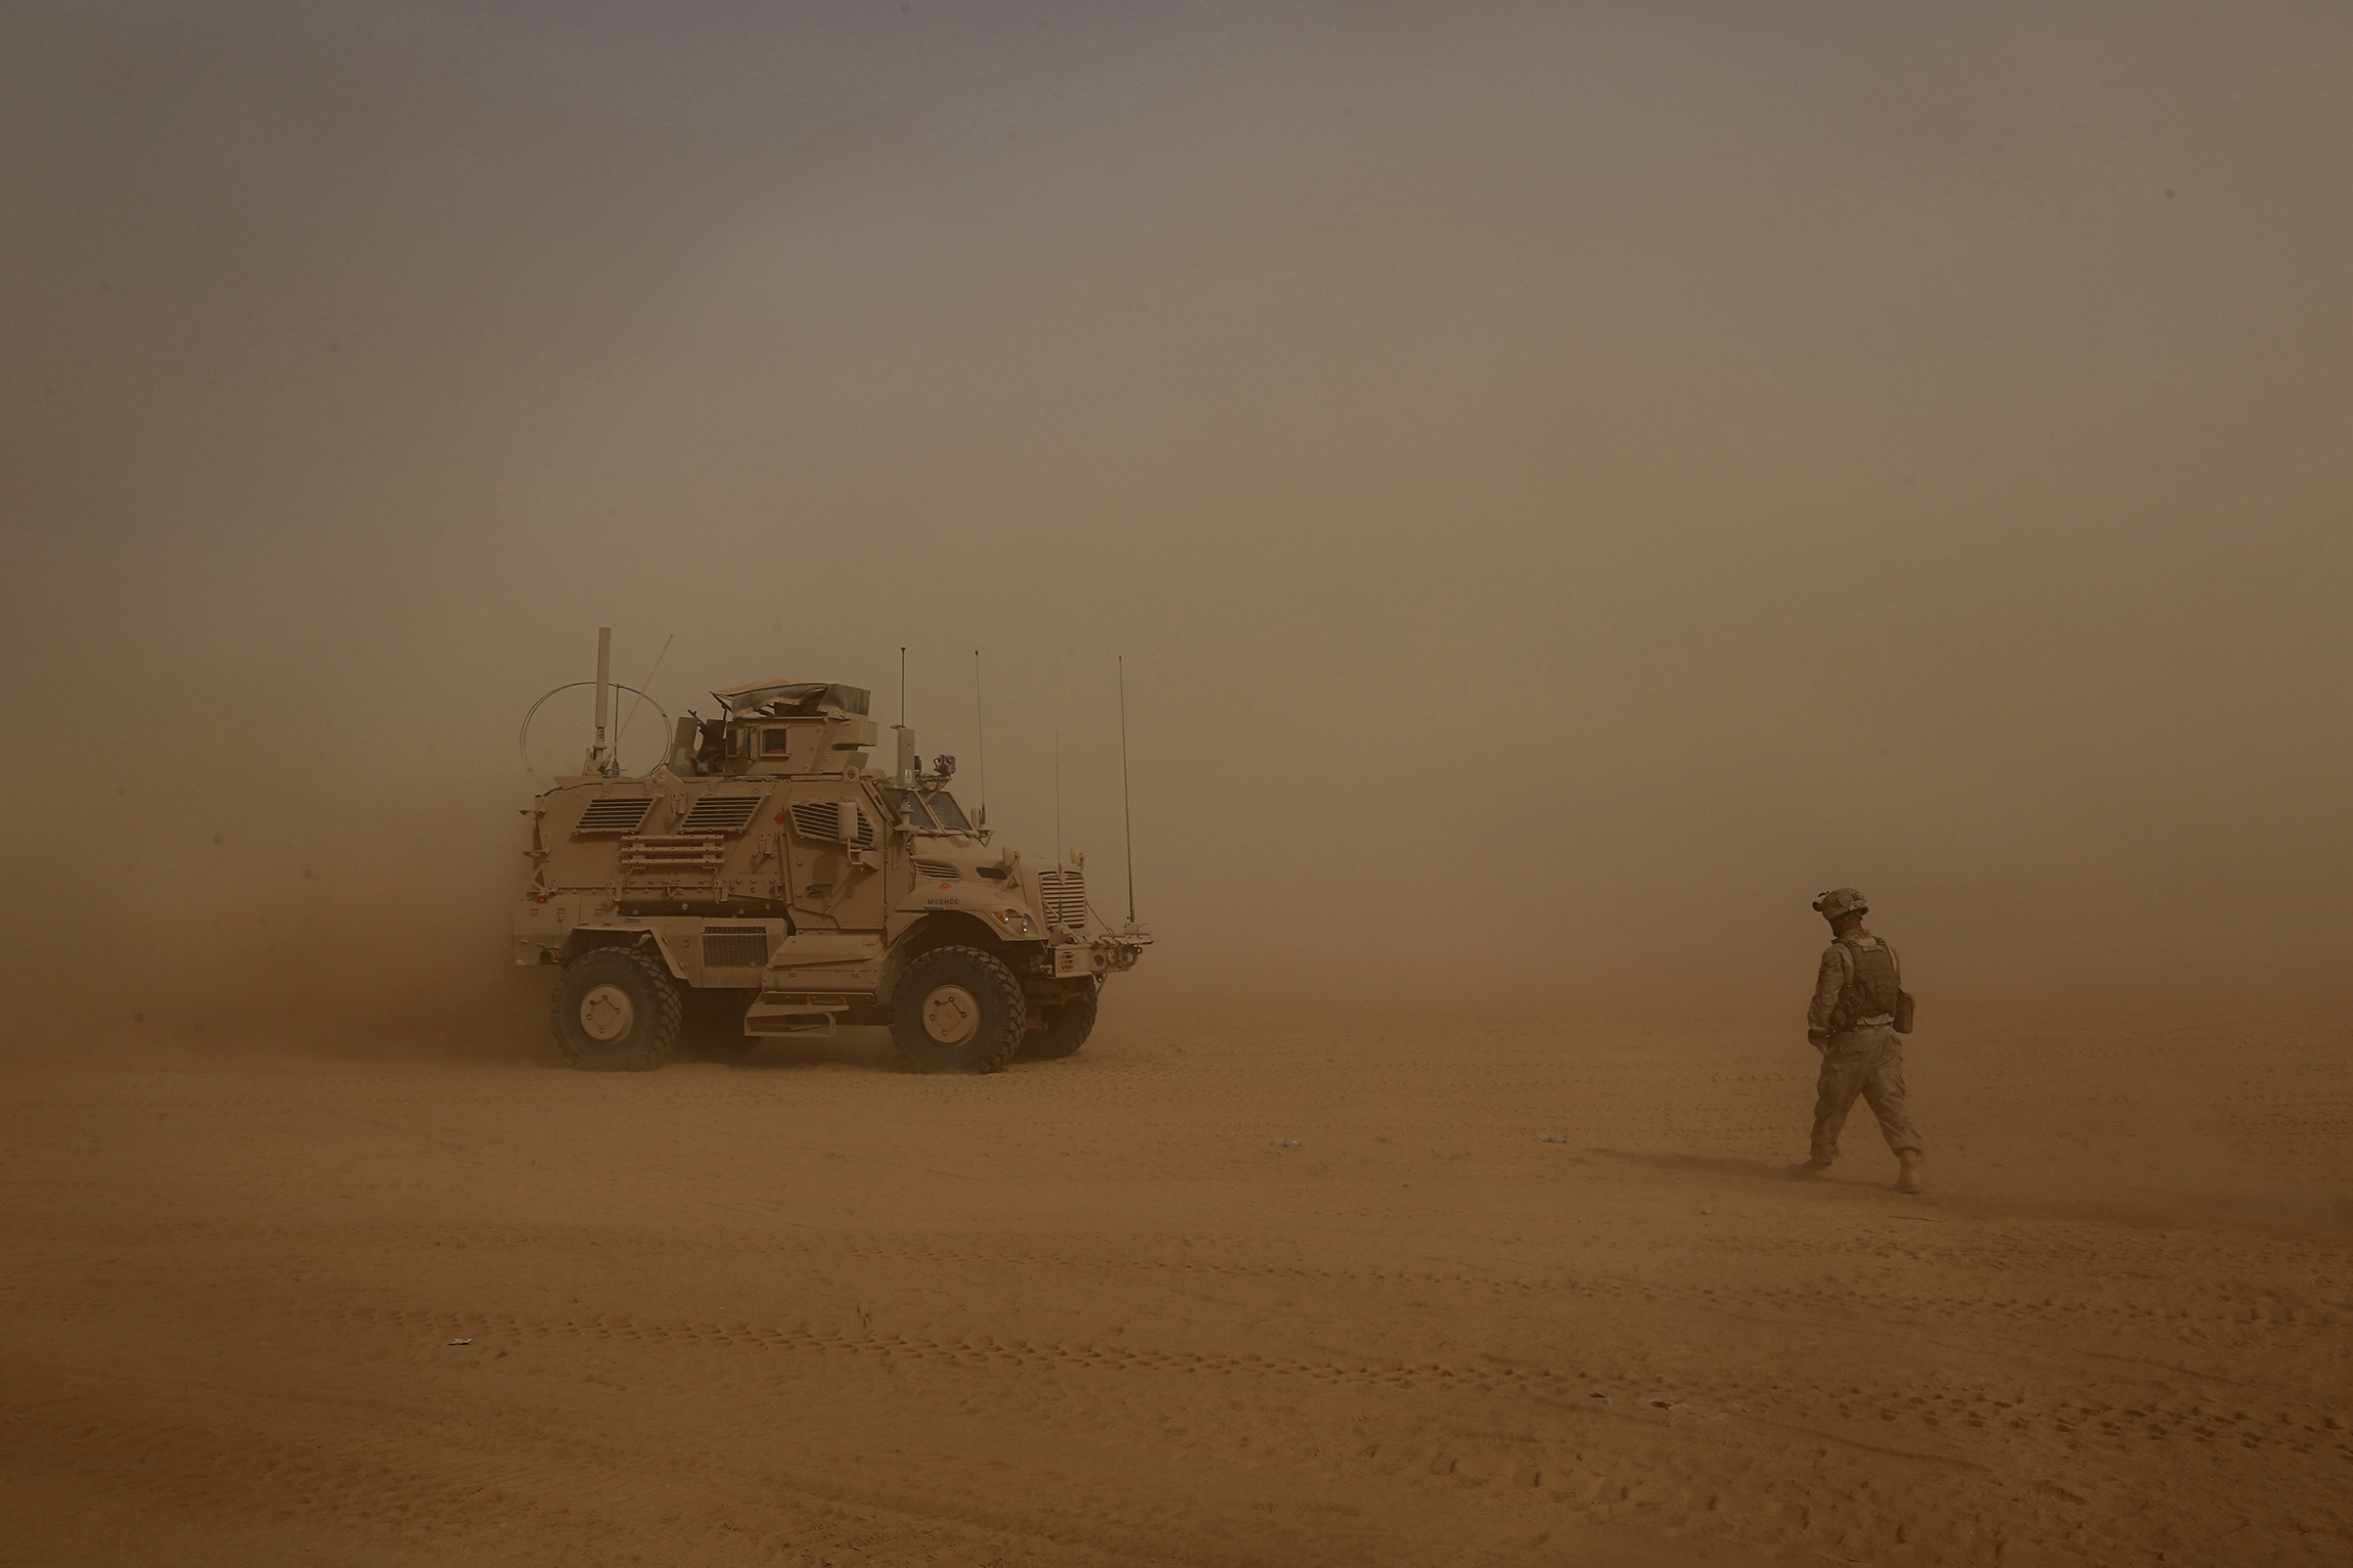 U.S. Marines prepare to build a military outpost in the fight against ISIS during a sandstorm in western Anbar, Iraq, on Nov. 6, 2017. (AP/REX/Shutterstock)